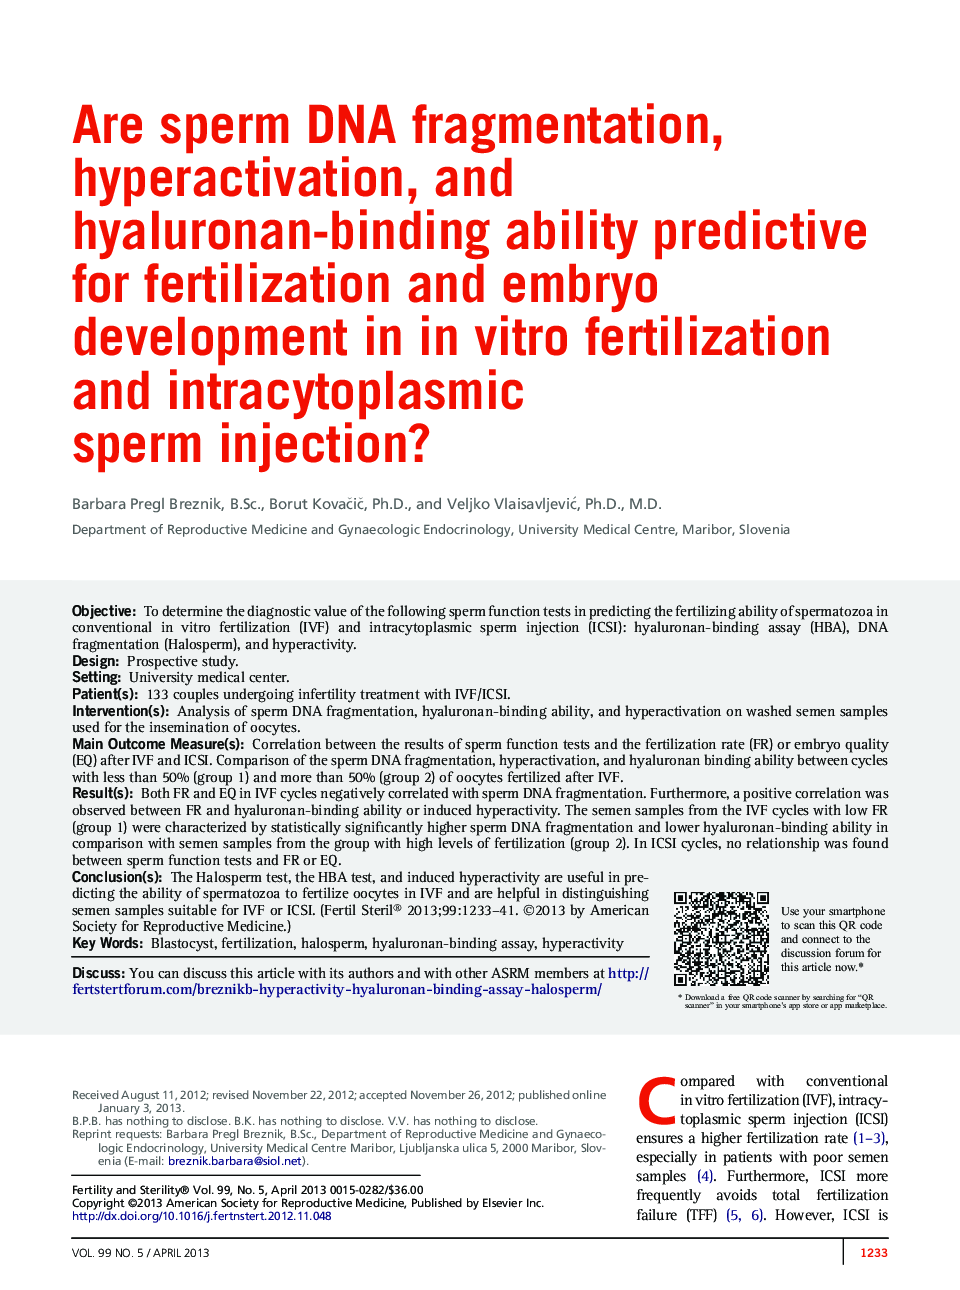 Are sperm DNA fragmentation, hyperactivation, and hyaluronan-binding ability predictive for fertilization and embryo development in in vitro fertilization and intracytoplasmic sperm injection? 